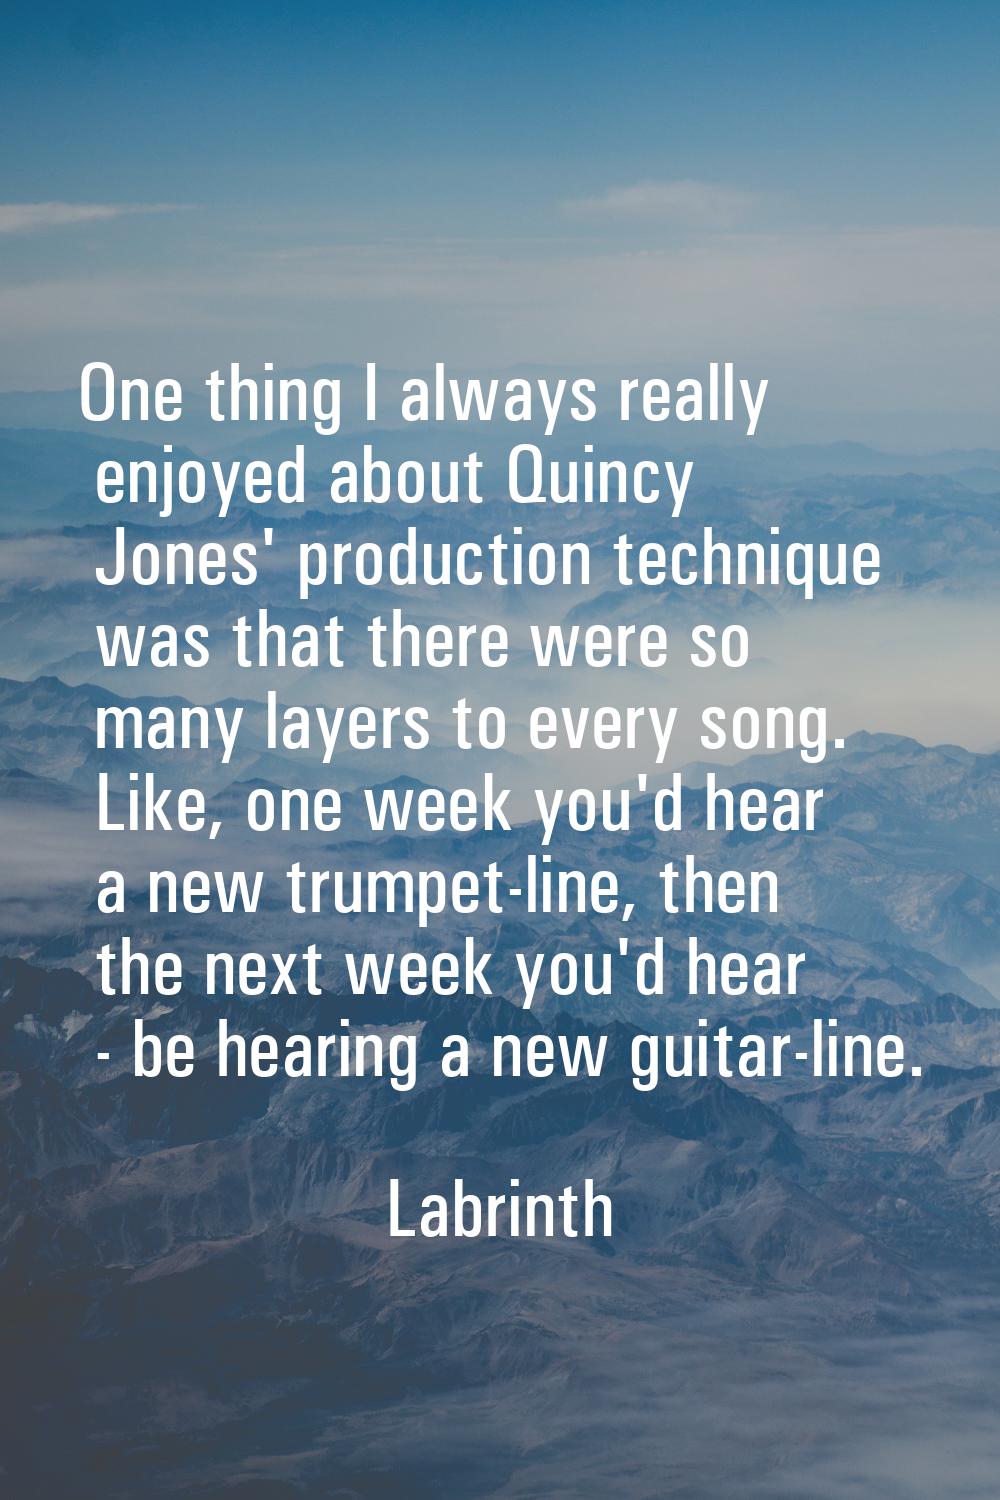 One thing I always really enjoyed about Quincy Jones' production technique was that there were so m